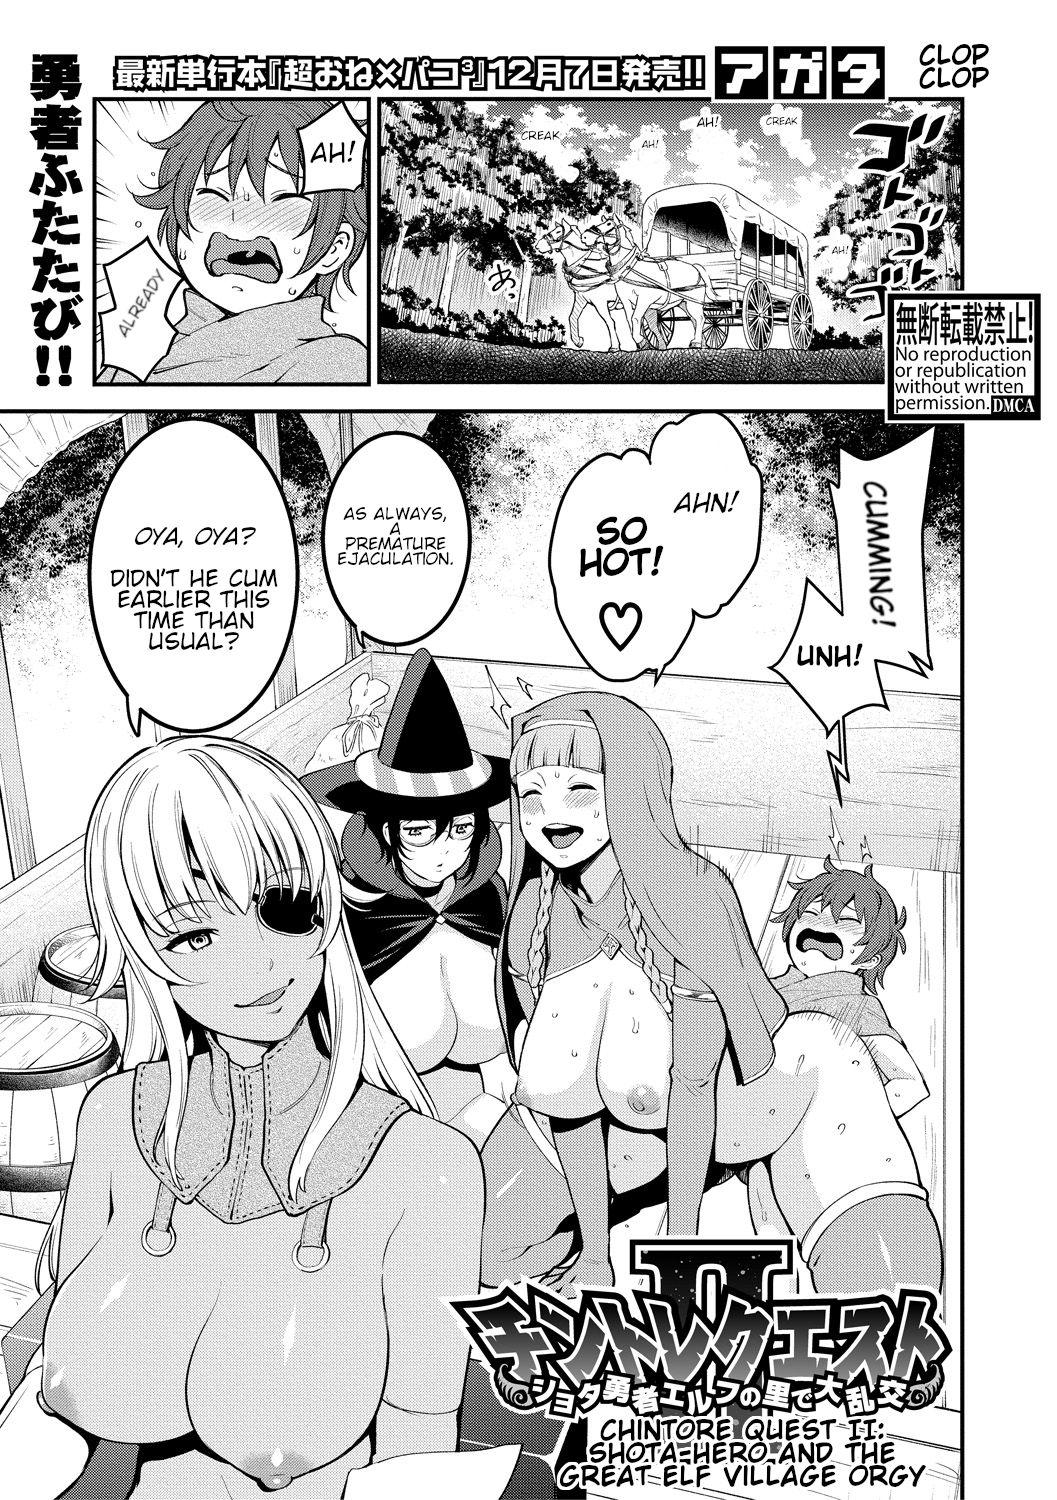 Sloppy Chintore Quest II: Shota Yuusha Elf no Sato de Dai Rankou | Chintore Quest II: Shota Hero and the Great Elf Village Orgy Brazil - Page 1